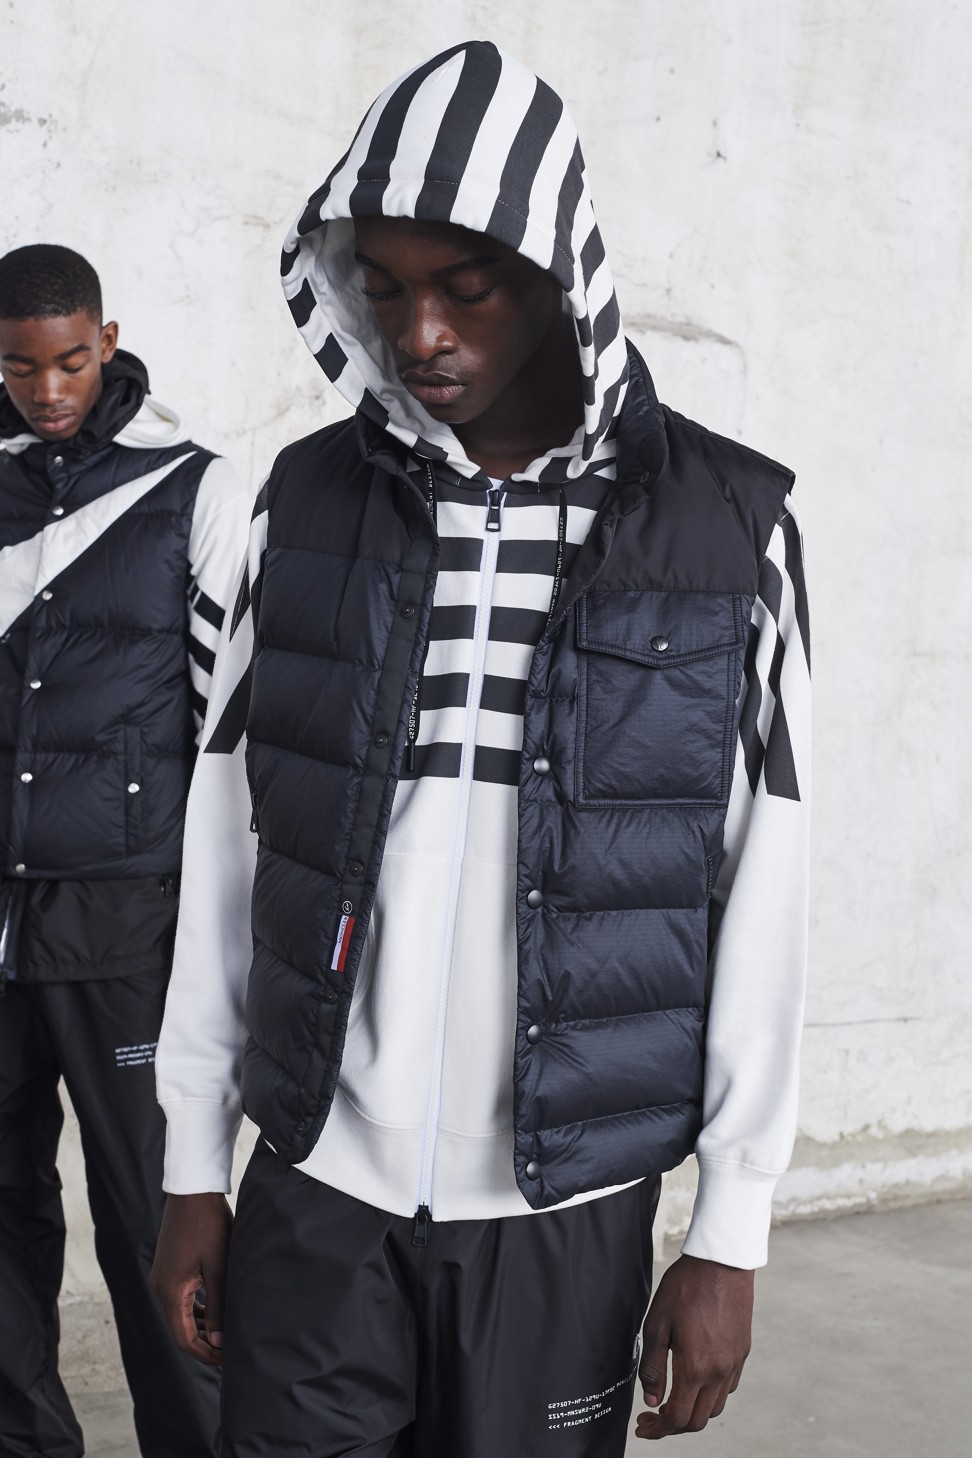 A look from Fujiwara’s collaboration with Moncler.